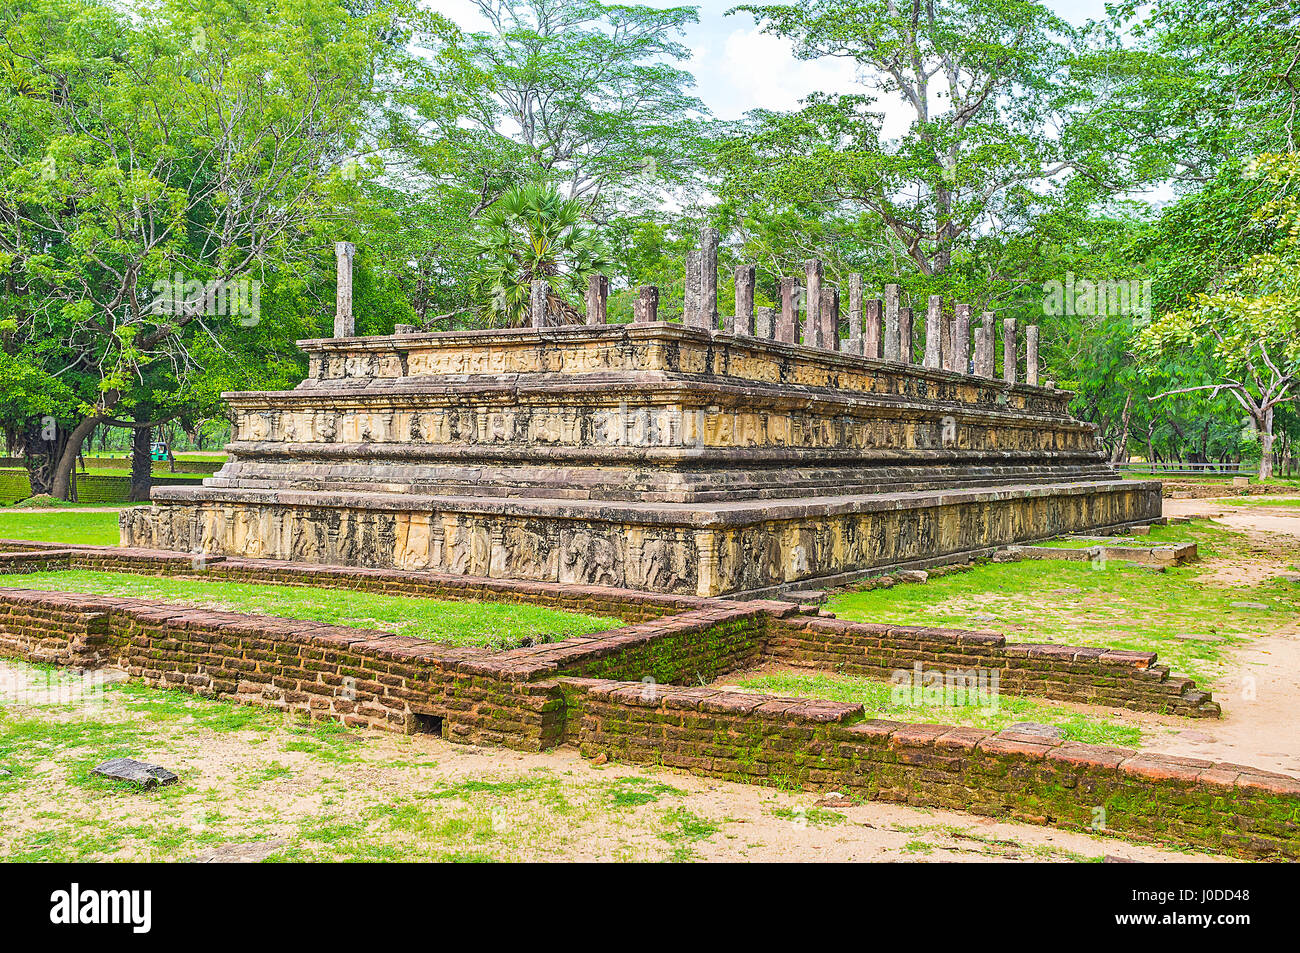 The numerous archaeological sites of the sacred city of Polonnaruwa attract tourists to enjoy the Sri Lankan heritage. Stock Photo